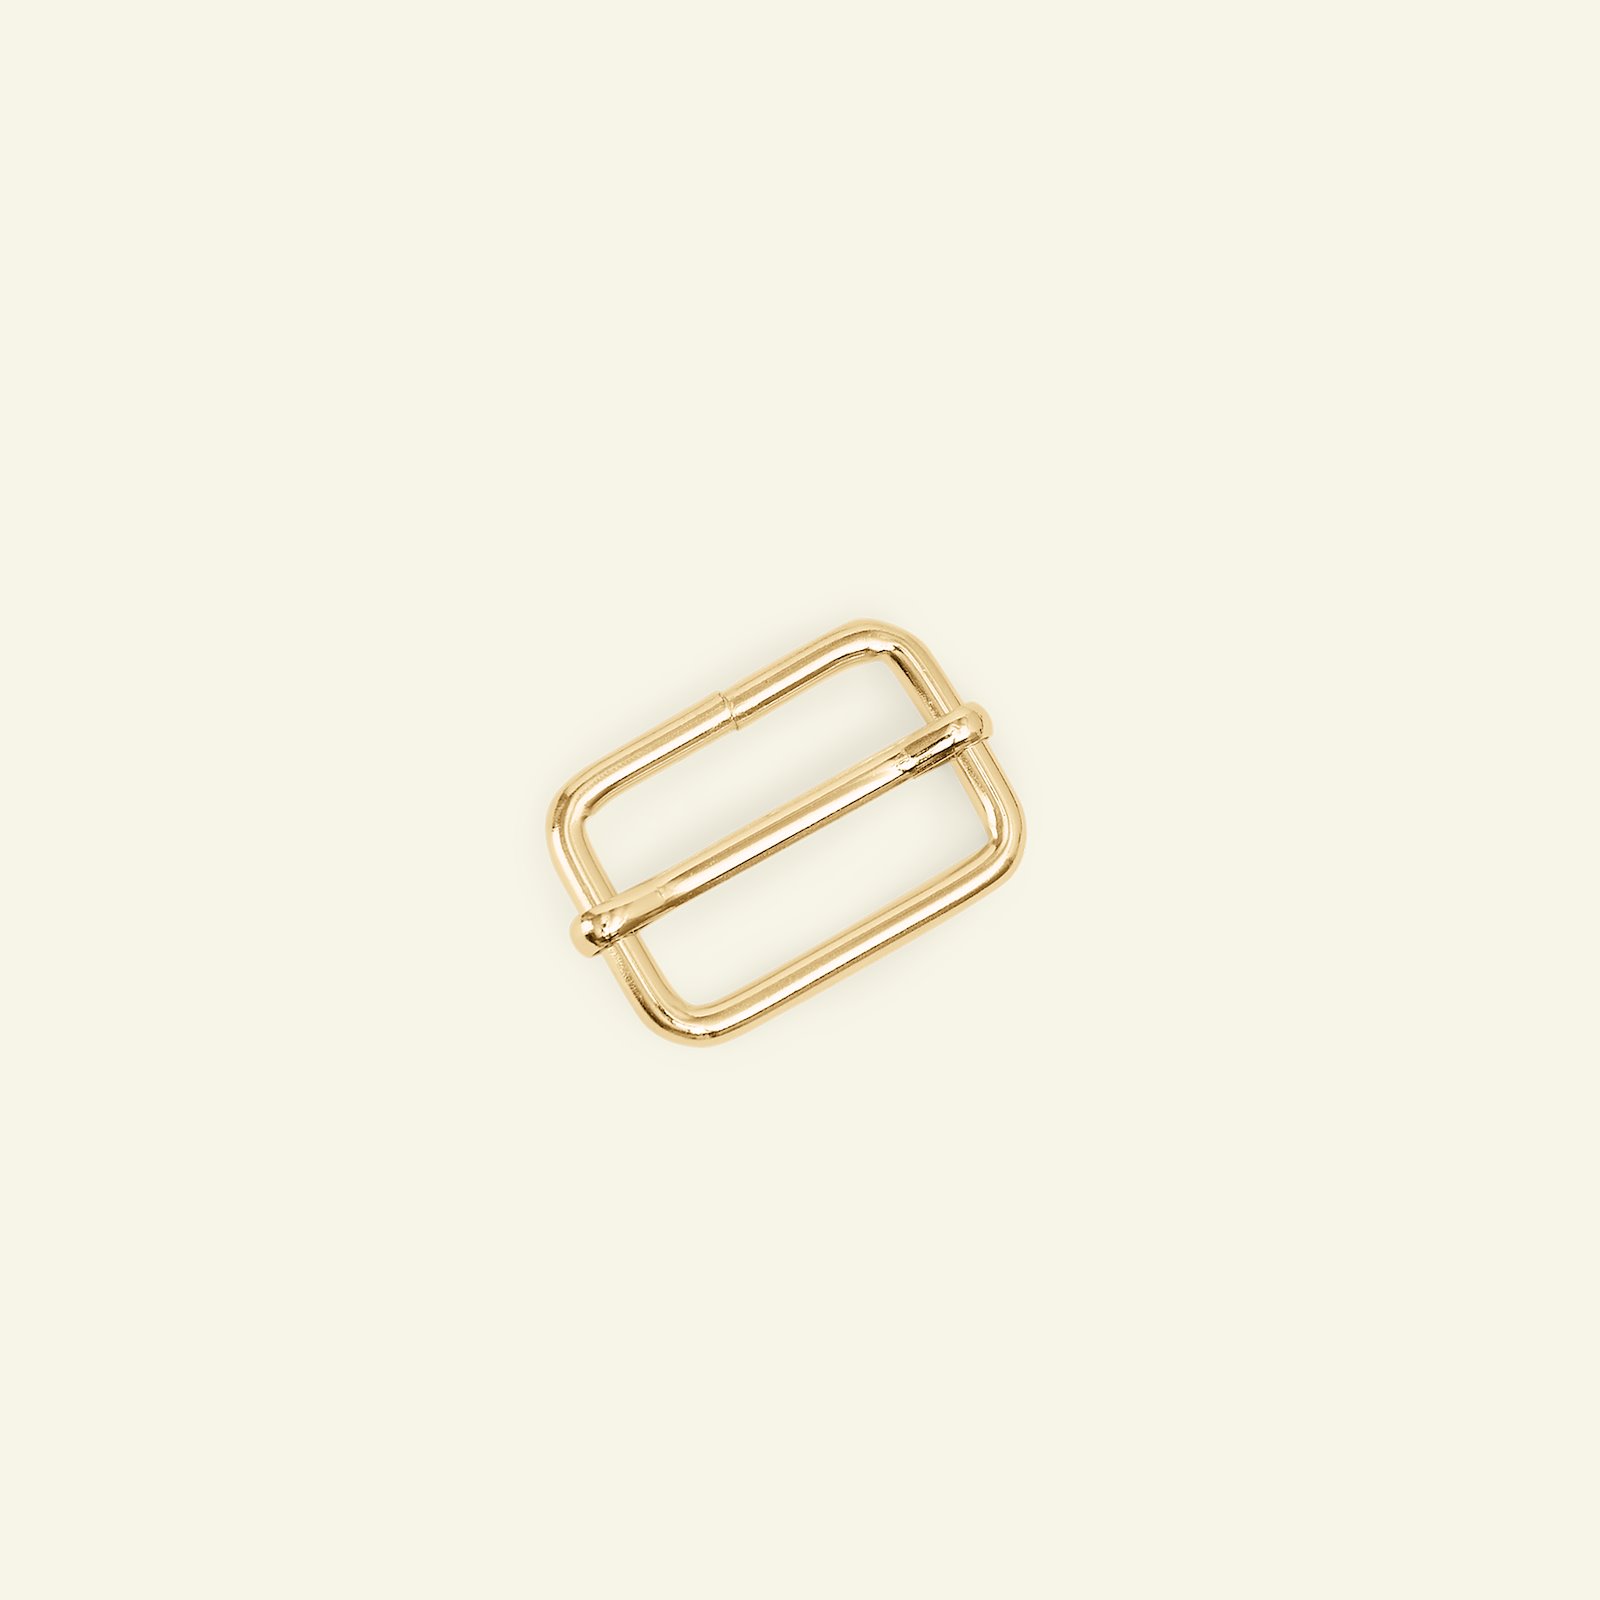 Buckle metal adjustable 32x20mm gold 1pc 45514_pack